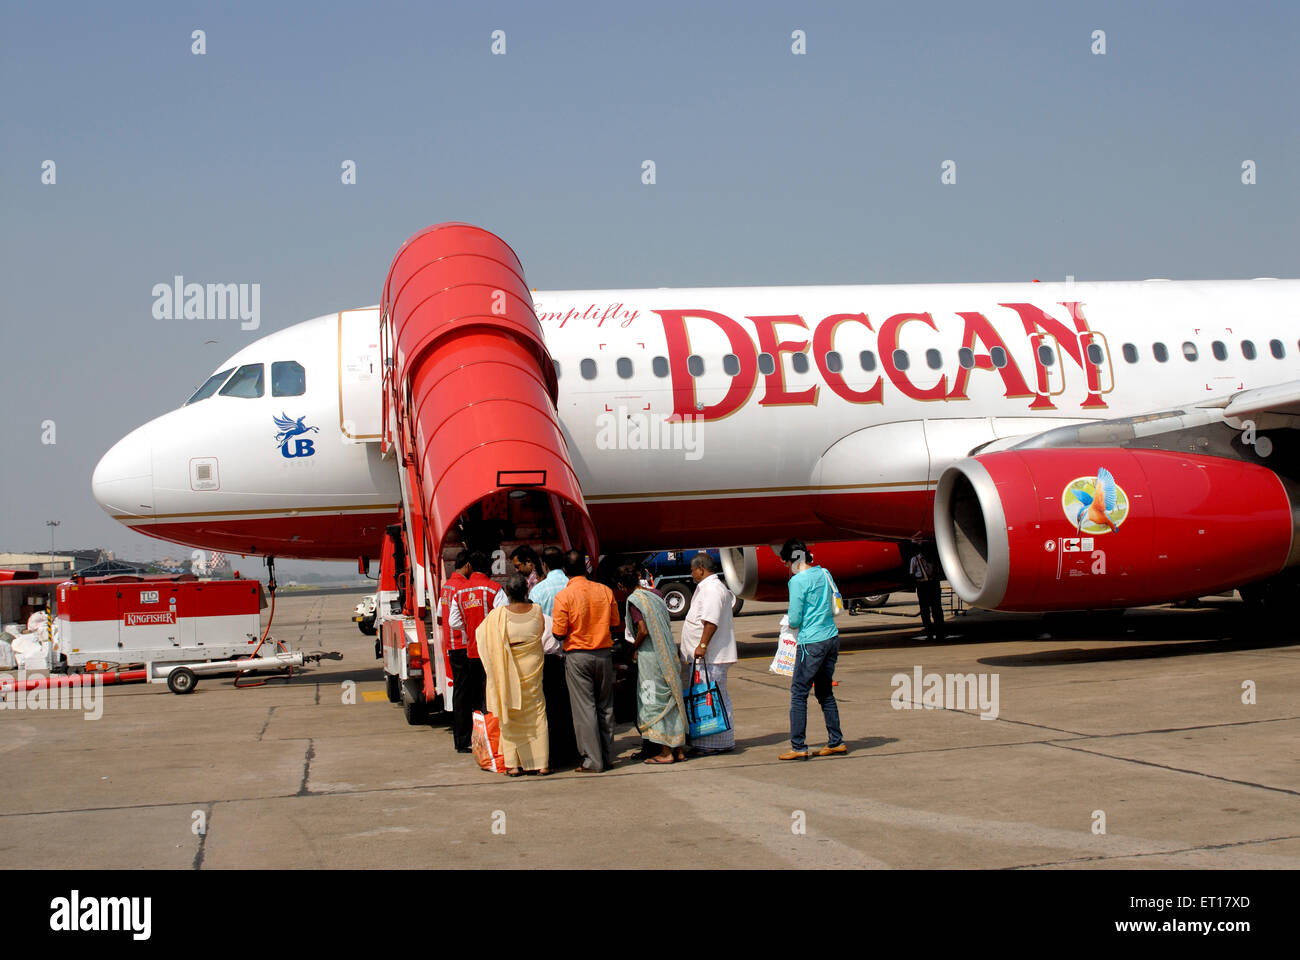 Passenger arriving in red and white deccan aeroplane at airport ; India No MR Stock Photo